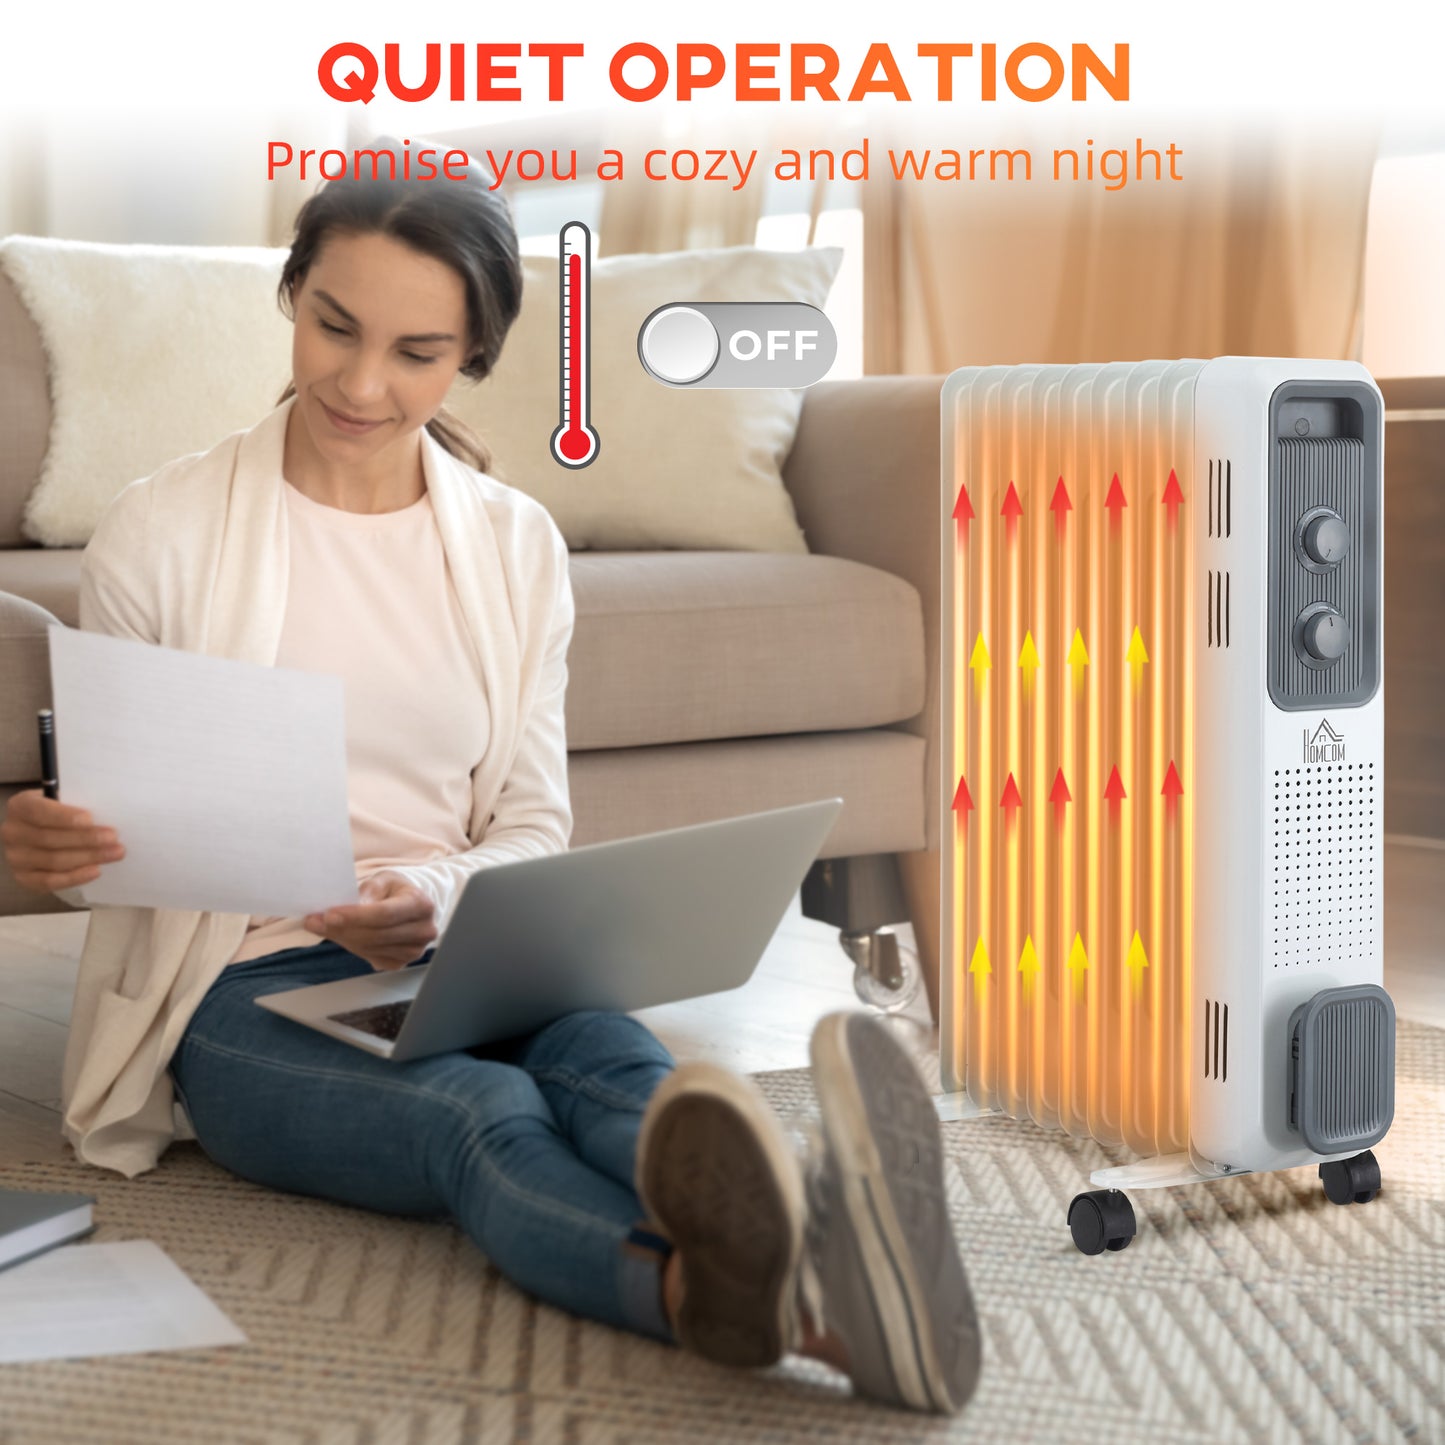 HOMCOM 2180W Oil Filled Radiator, Portable Electric Heater, w/ Built-in 24-Hour Timer, 3 Heat Settings, Adjustable Thermostat, Safe Power-Off